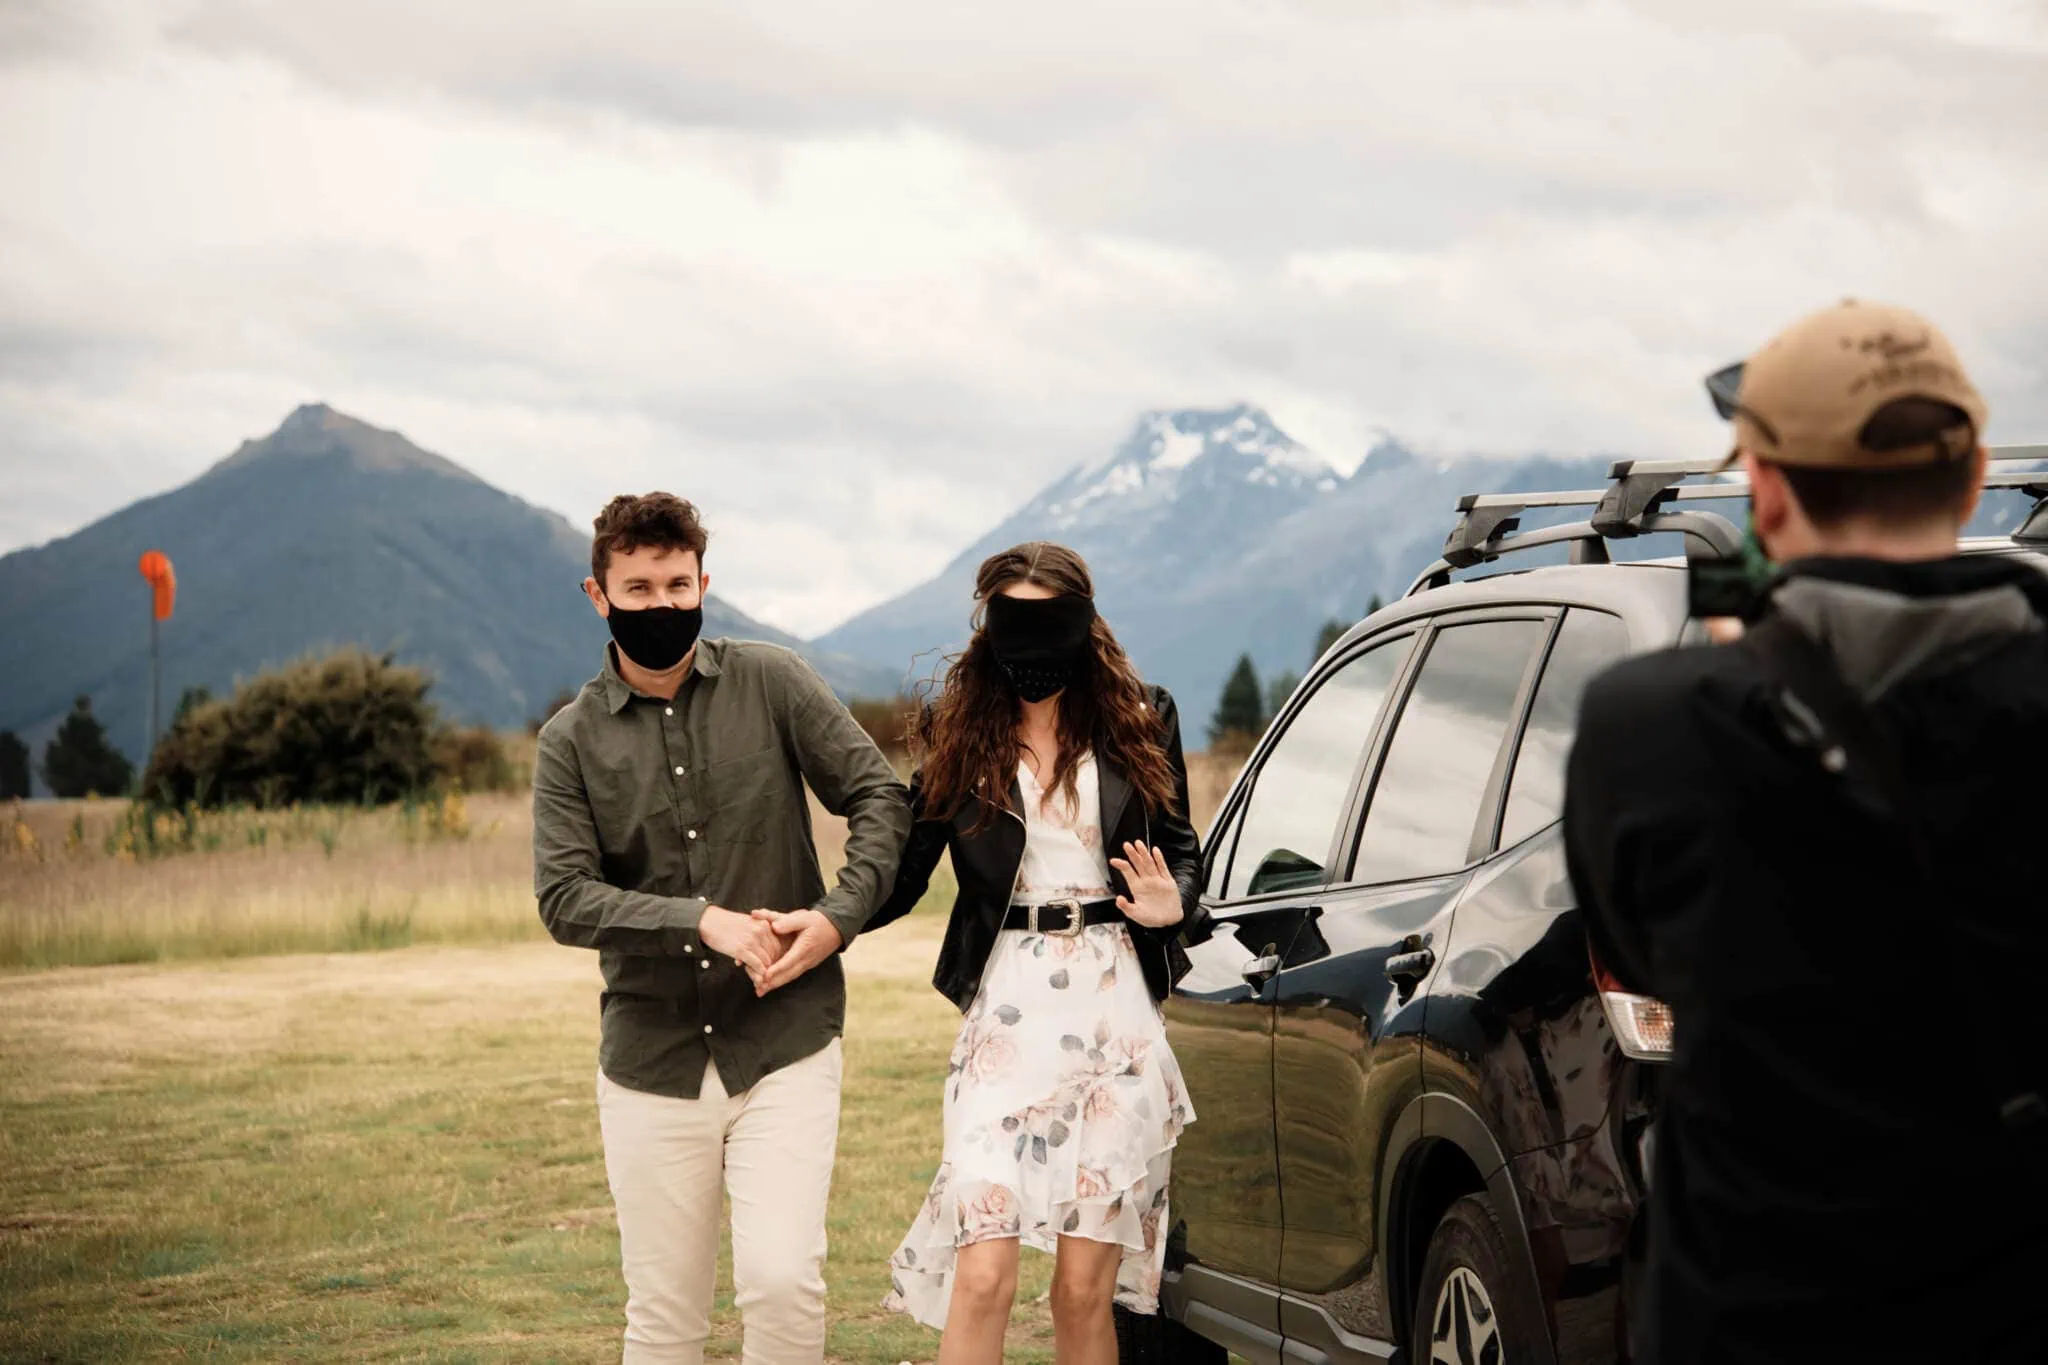 Scott and Hayley standing next to a car in front of mountains.